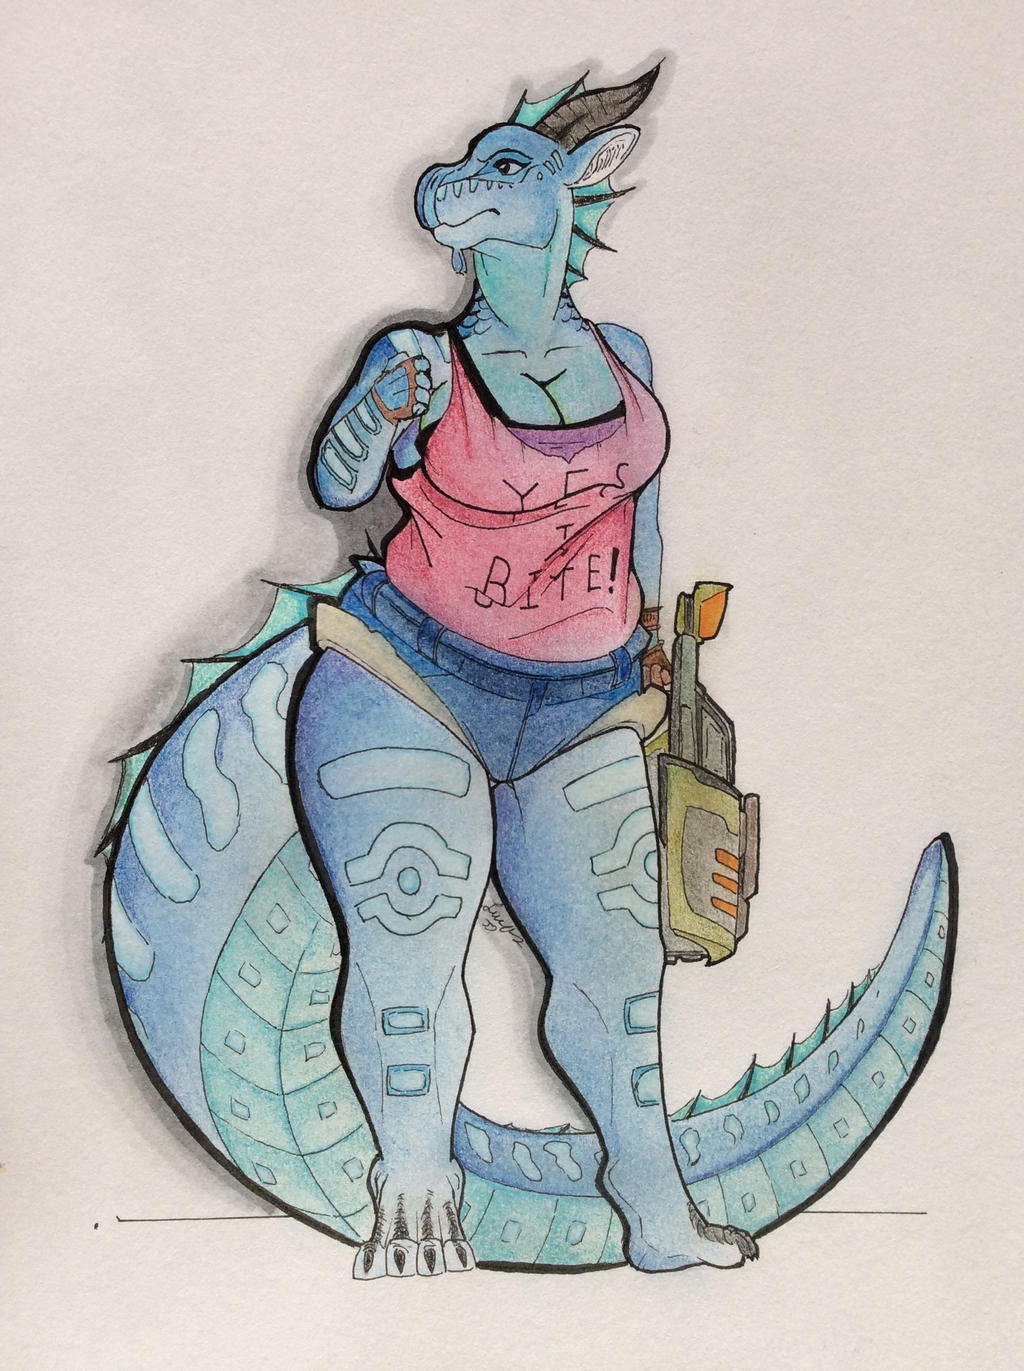 Yes I Bite Anthro Tsunami V2 By Dragons And Drawings On Deviantart